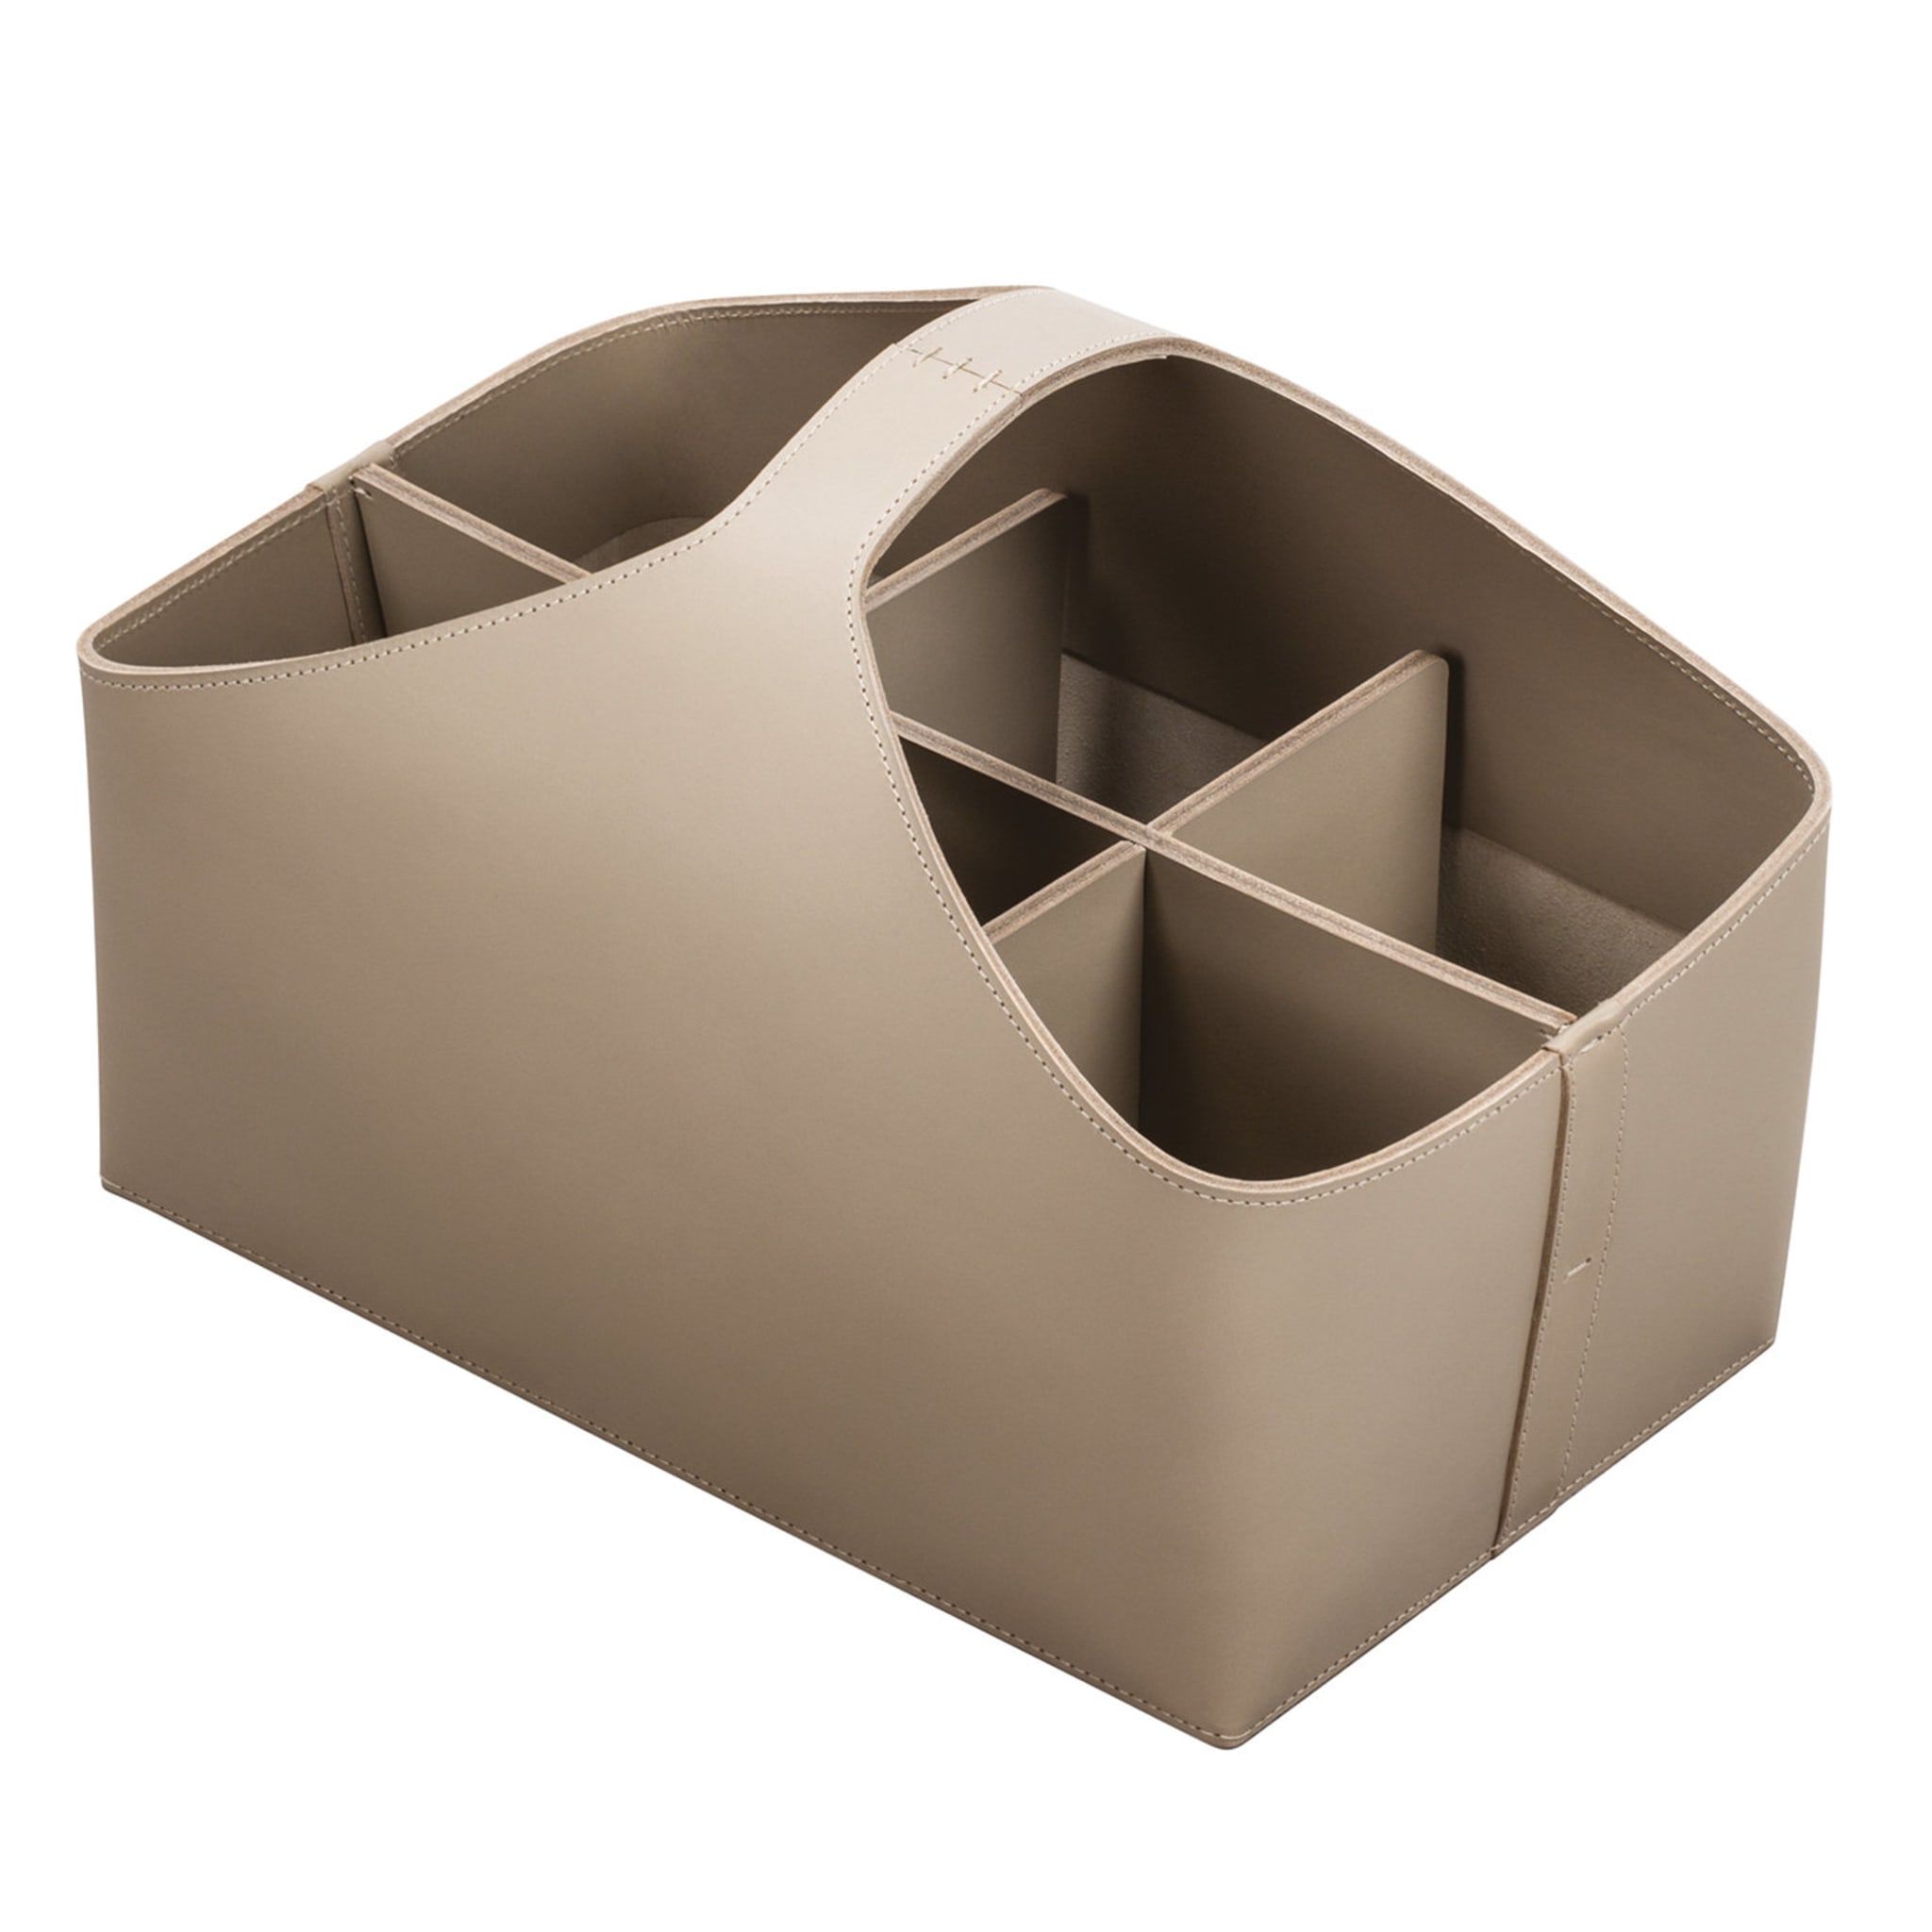 Arco Medium Caddy Basket with 6 Dividers in Sand Leather - Alternative view 1